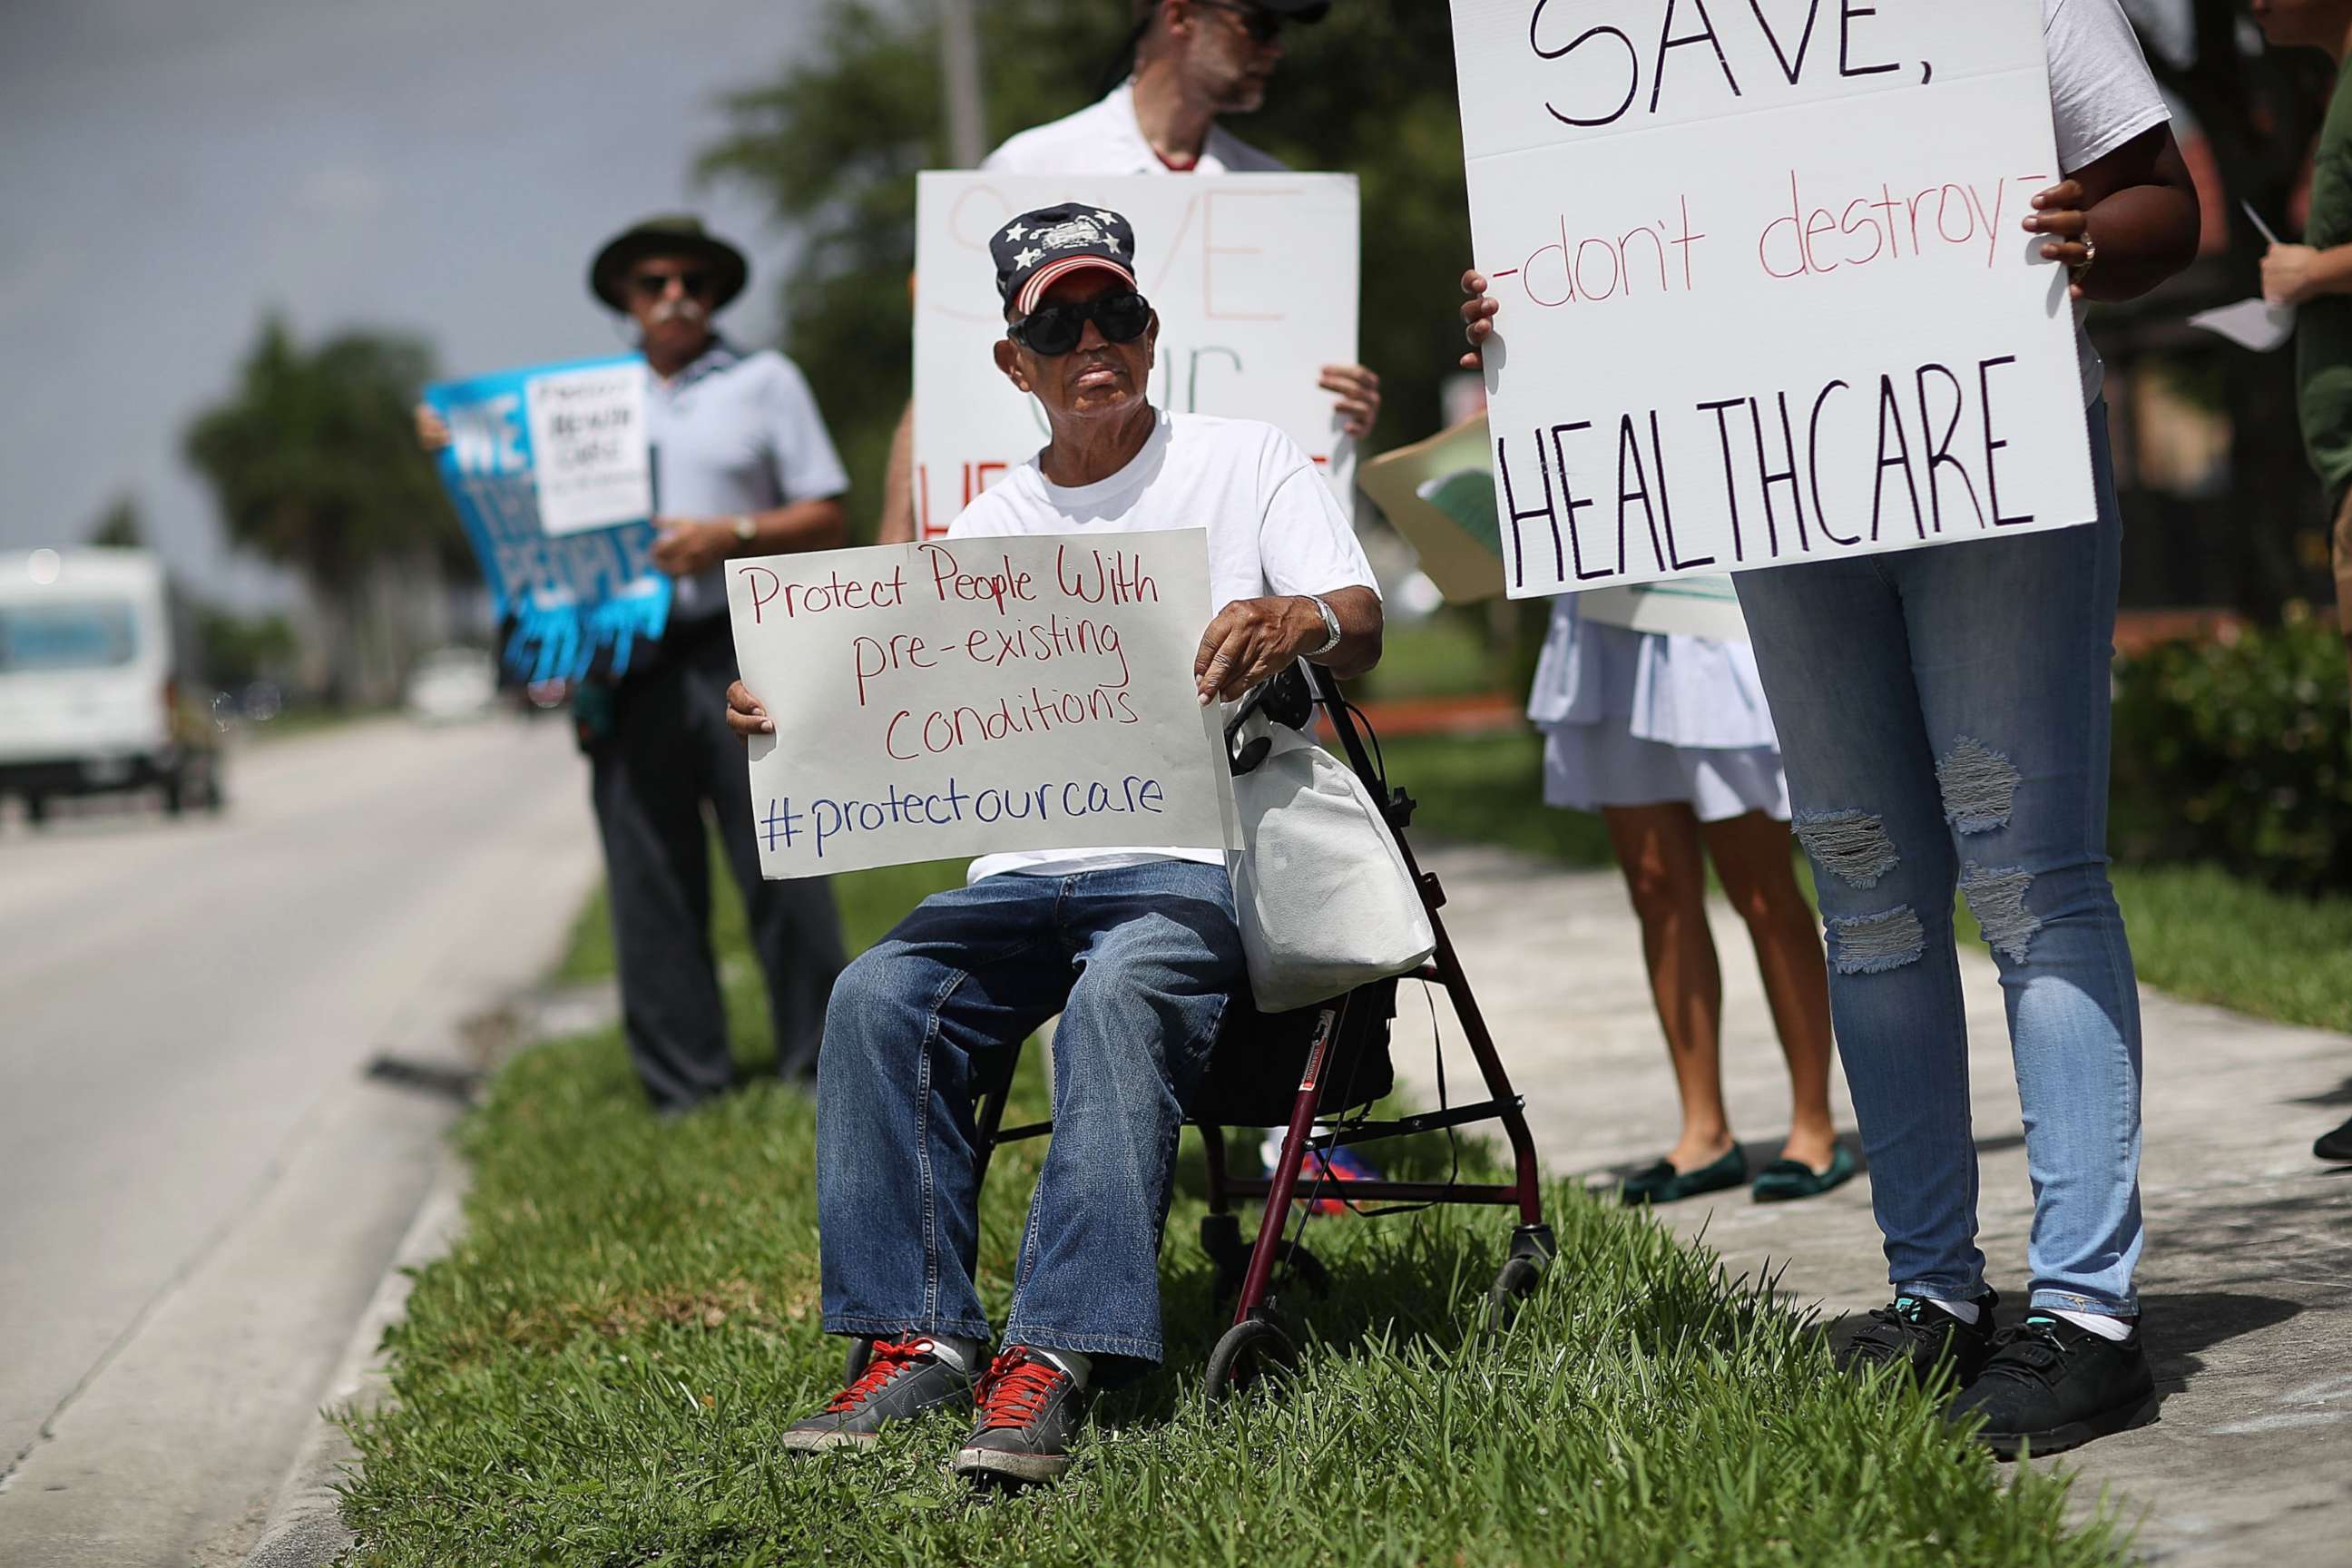 PHOTO: People protest in Miami, Fla., Aug. 3, 2017, against cuts to Medicaid and the Affordable Care Act.